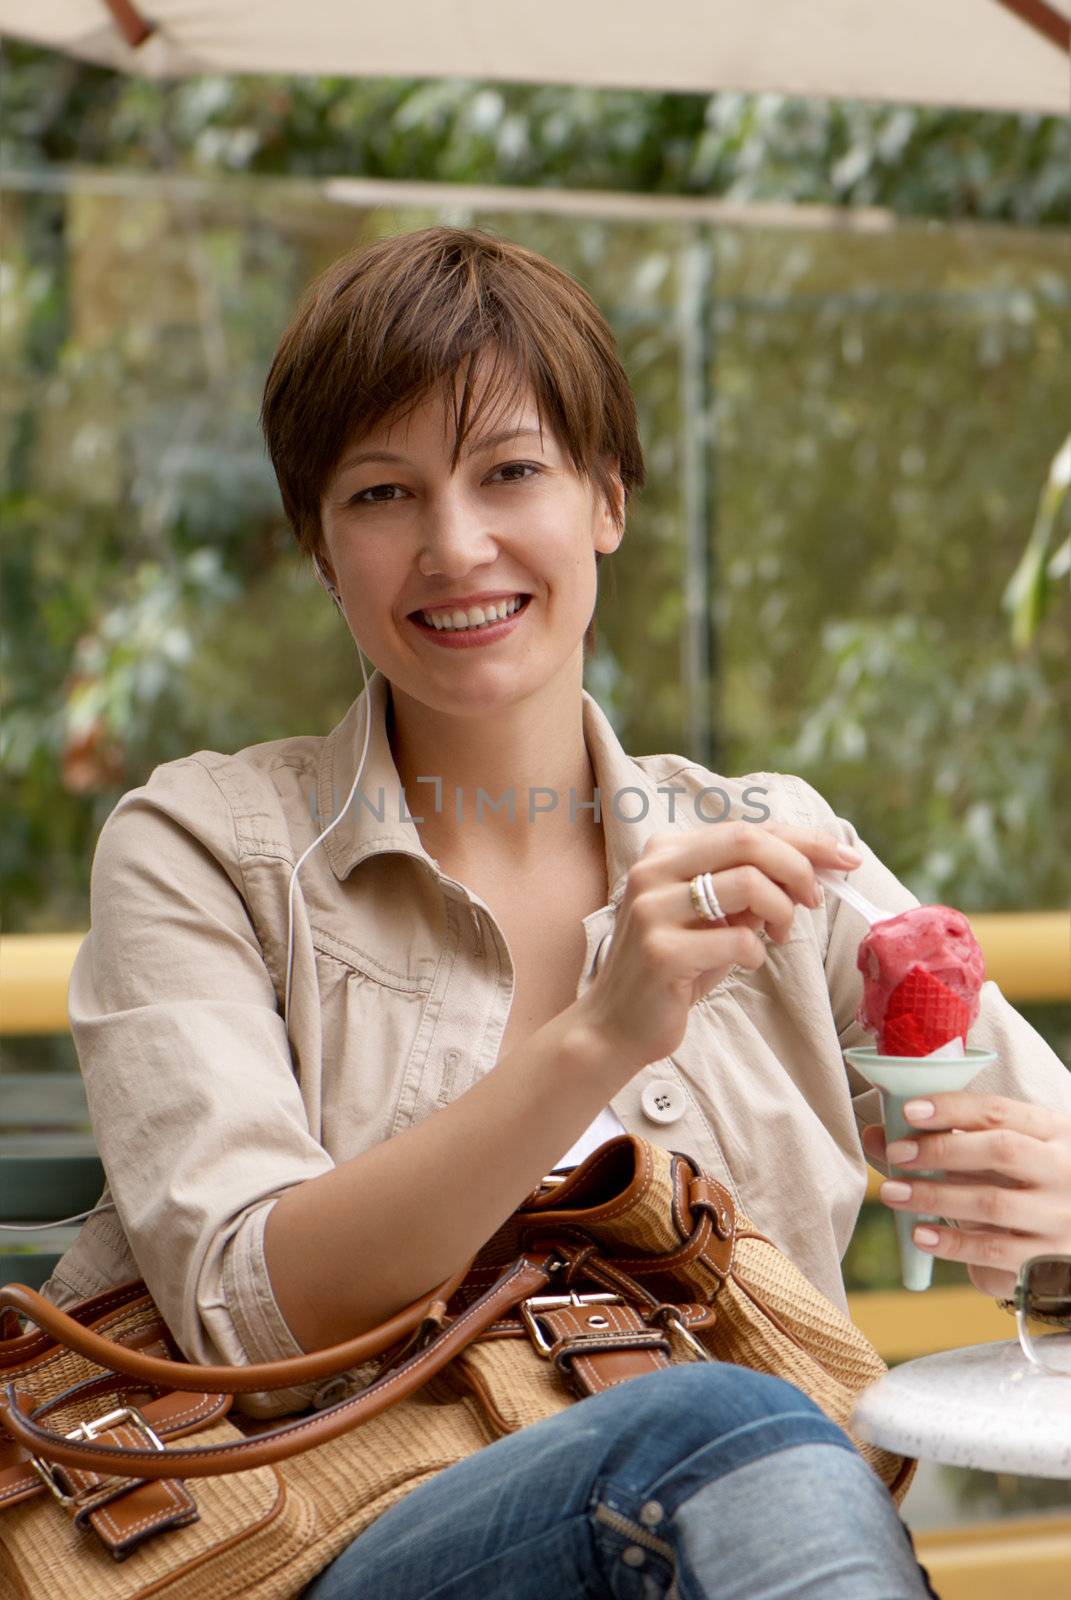 The happy woman with fruit ice-cream  by Anpet2000